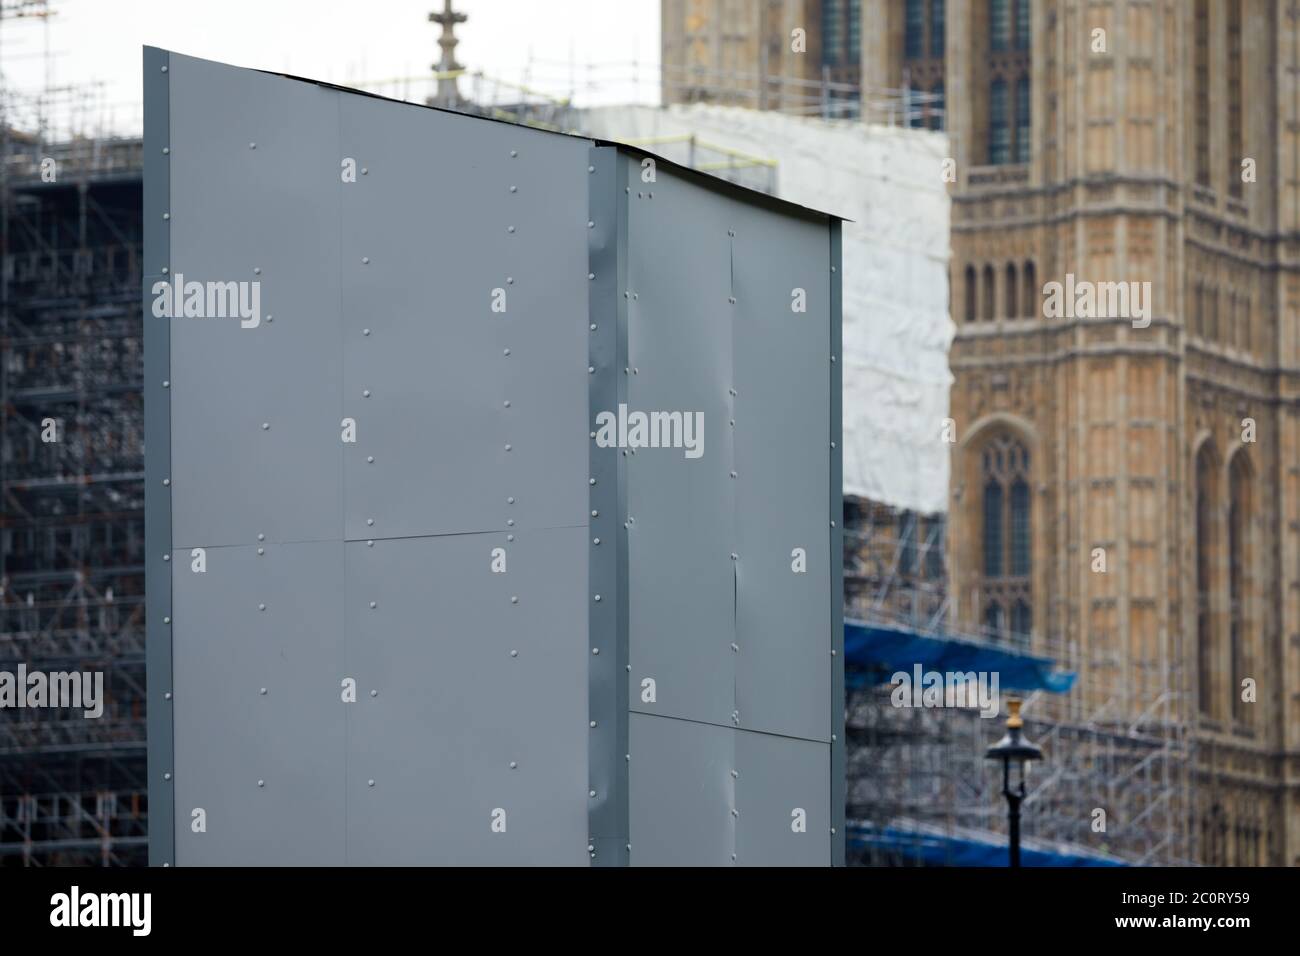 London, UK. - 12 Jun 2020: A box covers the statue of Winston Churchill outiside the Houses of Parliament following recent attacks on it during BlackLivesMatter protests. Stock Photo